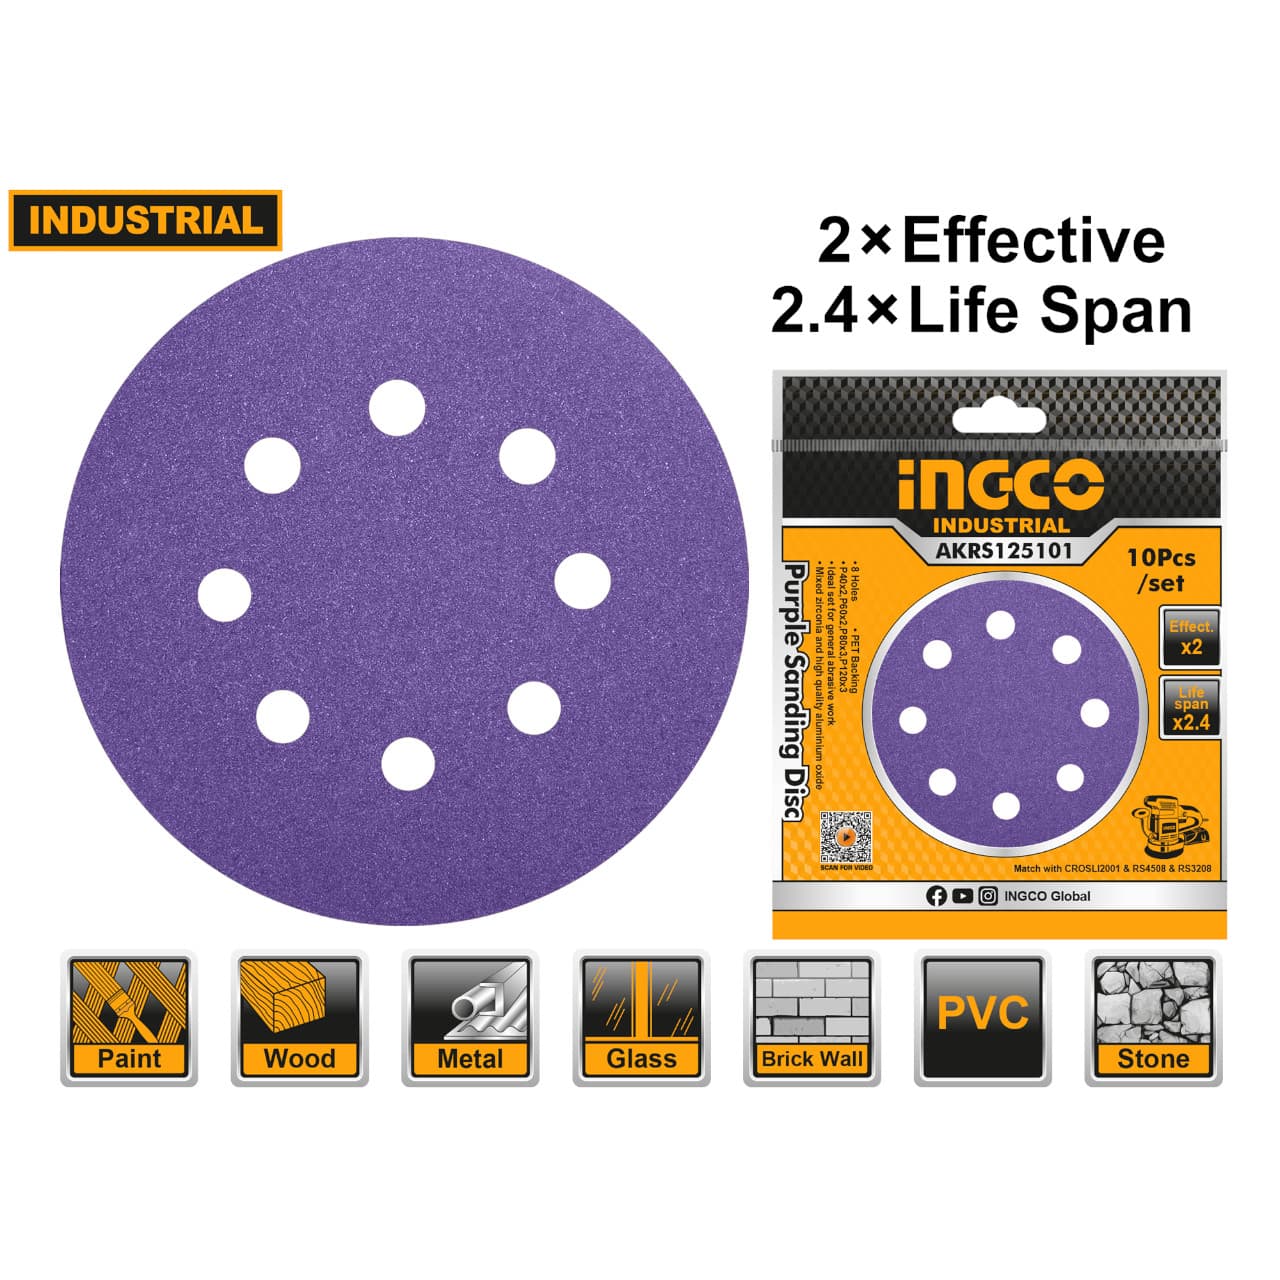 Ingco 10 Pieces Purple Sanding Disc Set 125mm - AKRS125101 | Supply Master | Accra, Ghana Sander Buy Tools hardware Building materials